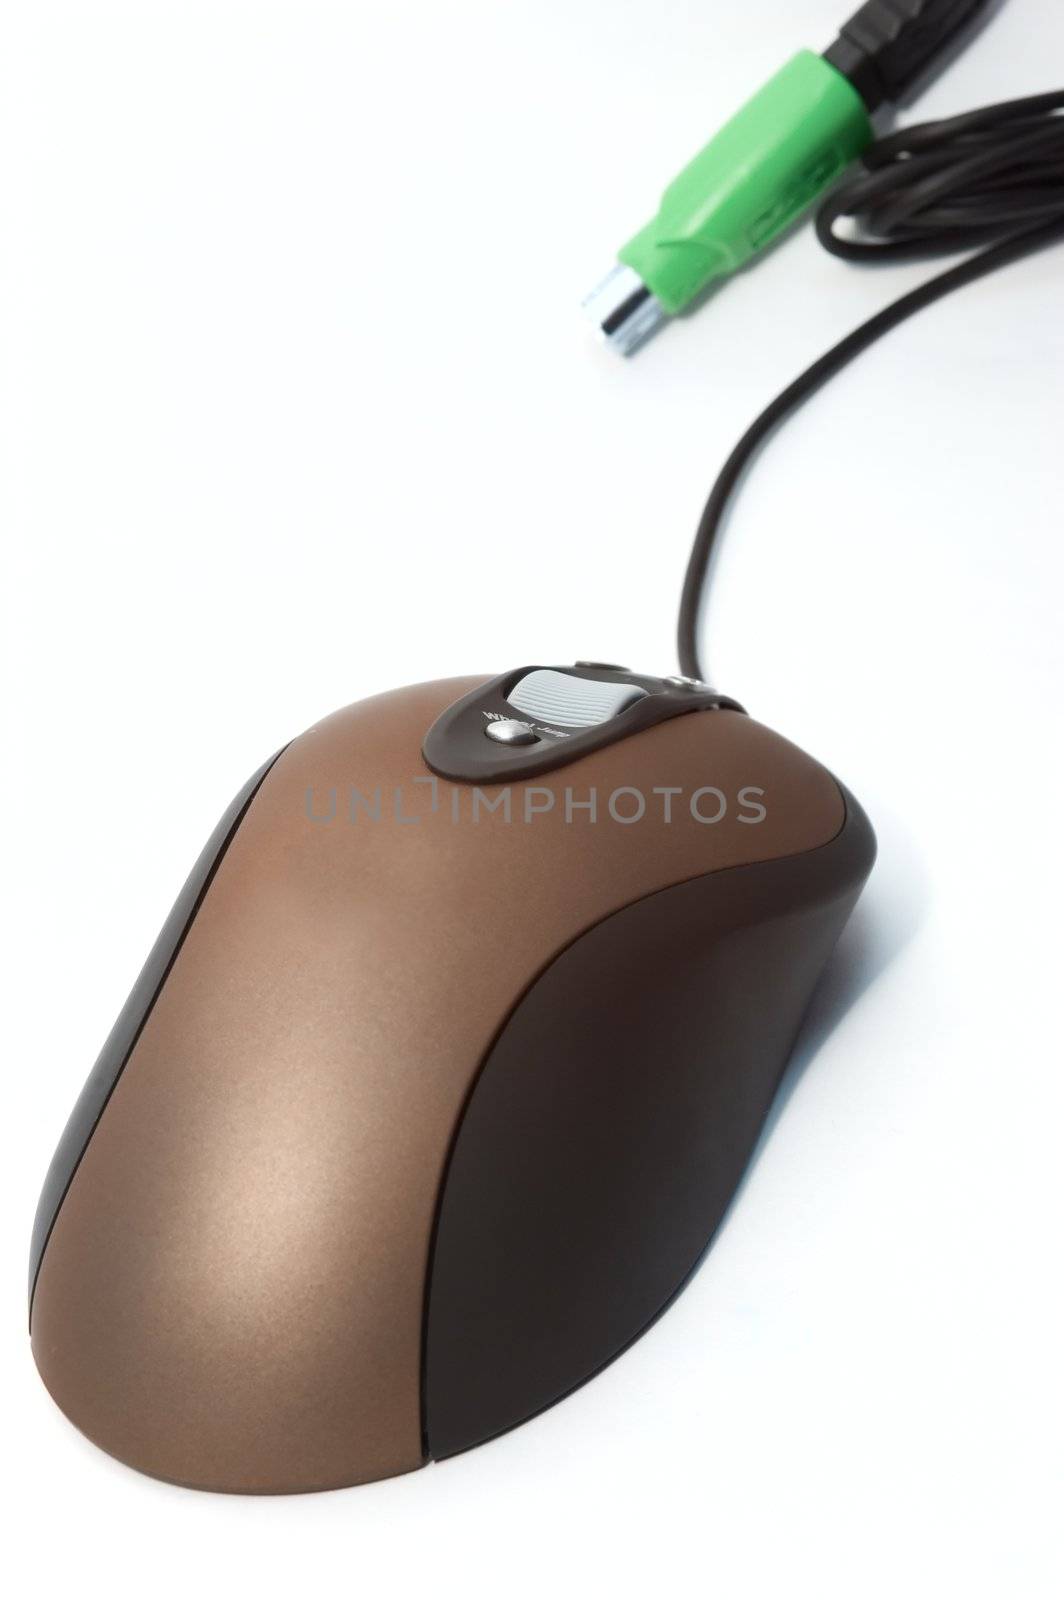 Computer modern laser mouse by rusak